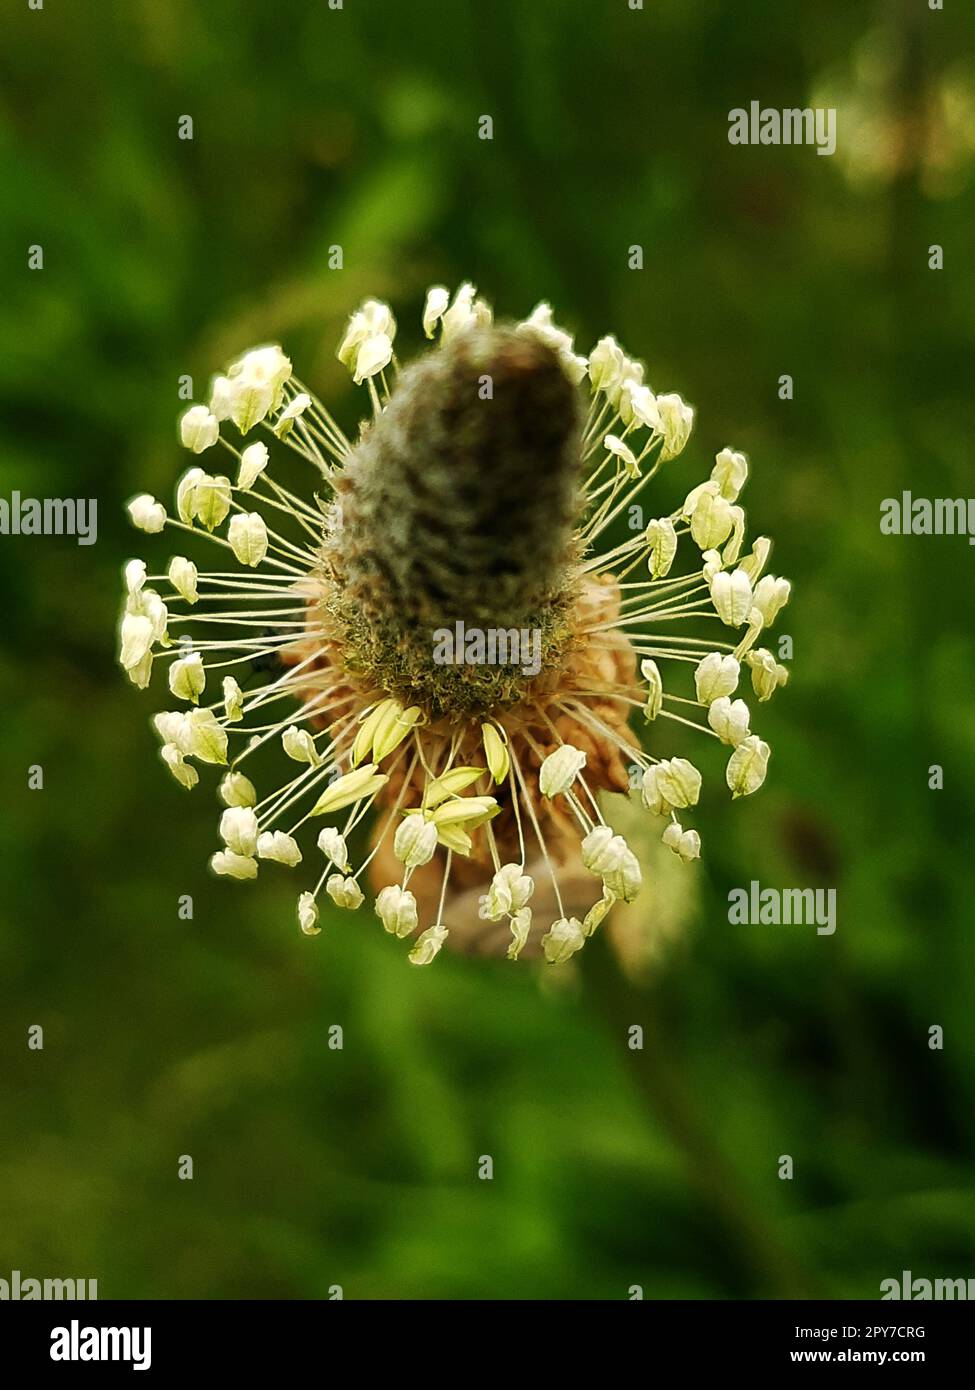 Plantain flower close up Stock Photo